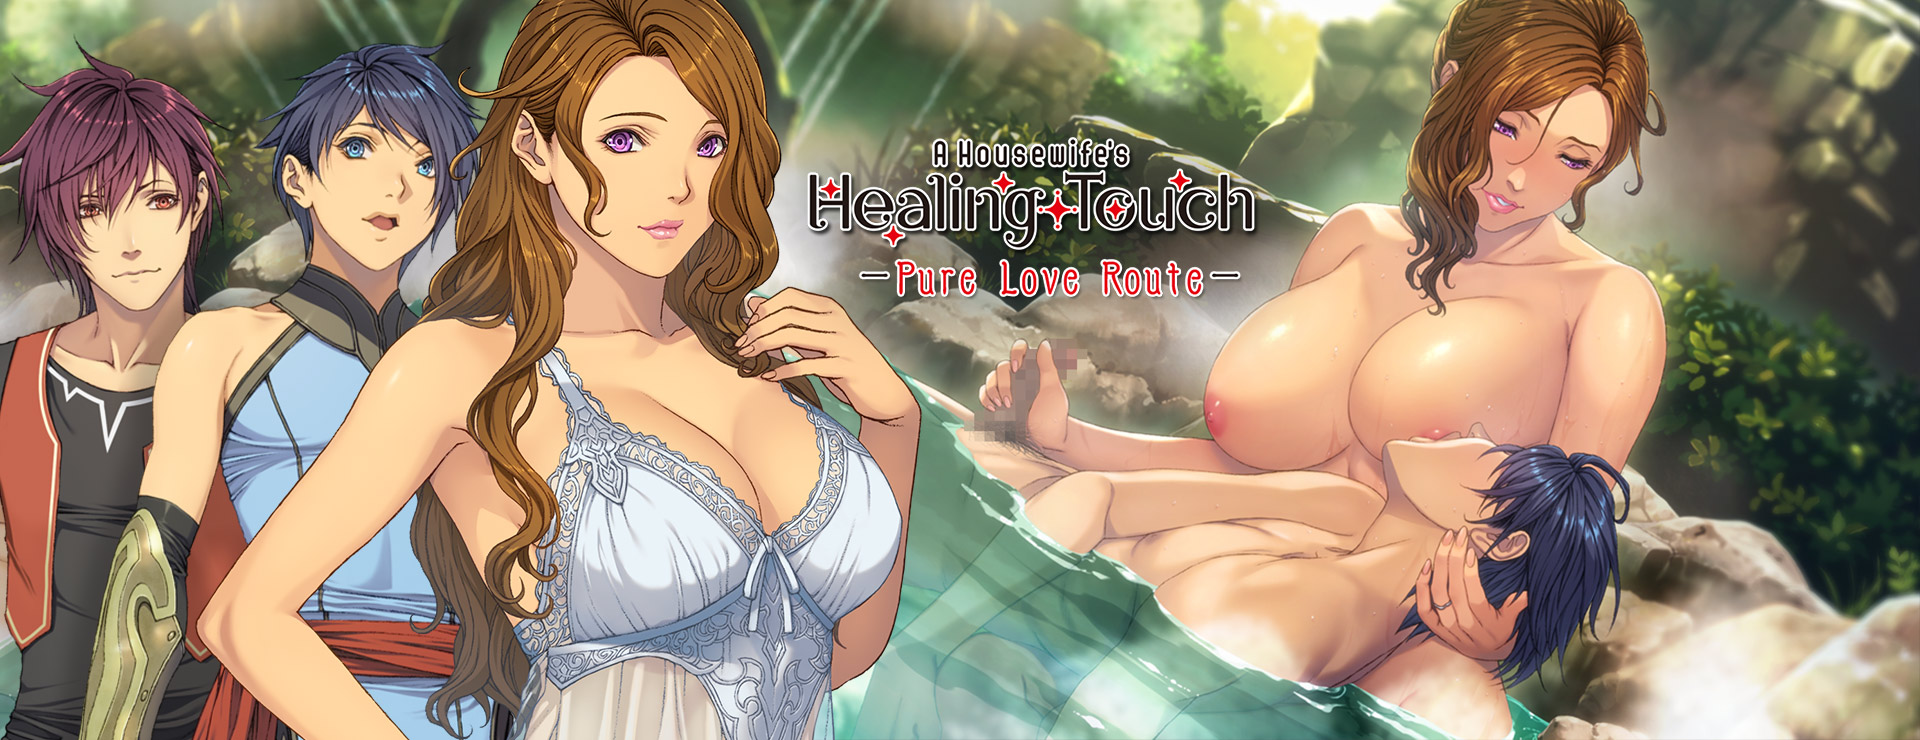 A Housewife's Healing Touch (Pure Love Route) - アクションアドベンチャー ゲーム